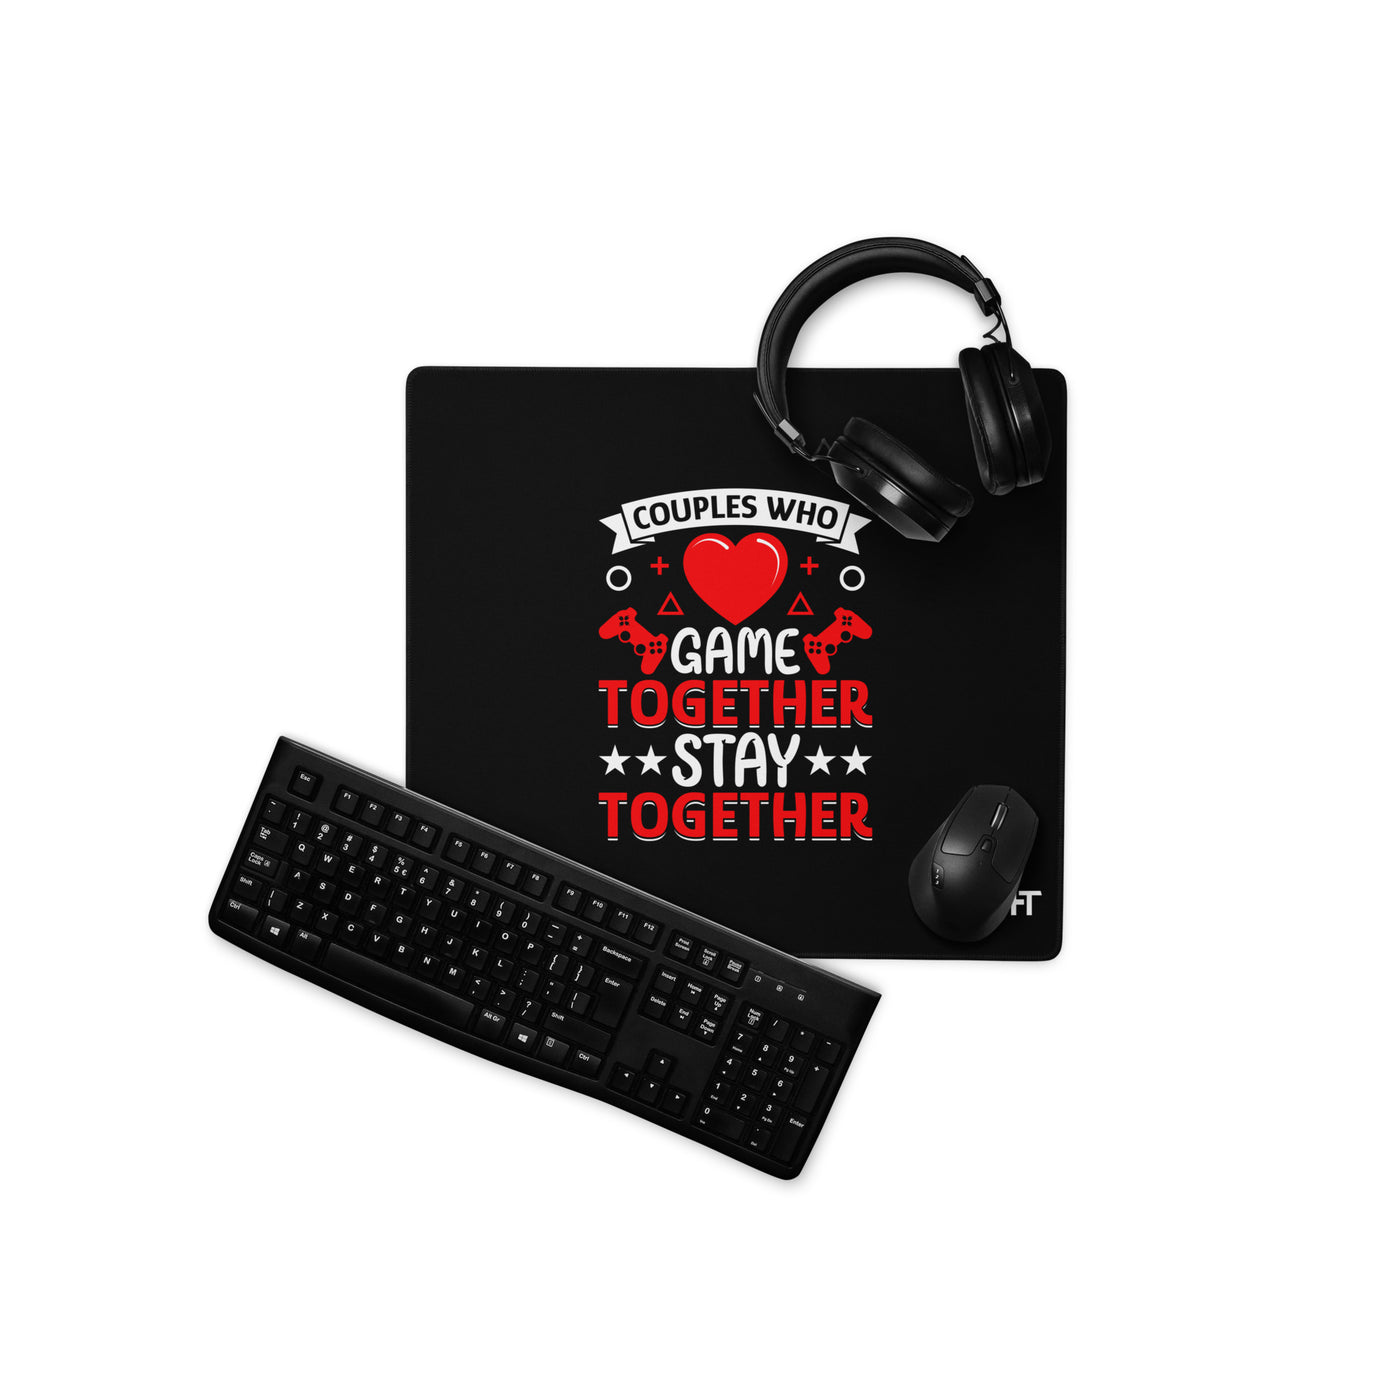 Couples who Game together, Stay together Desk Mat